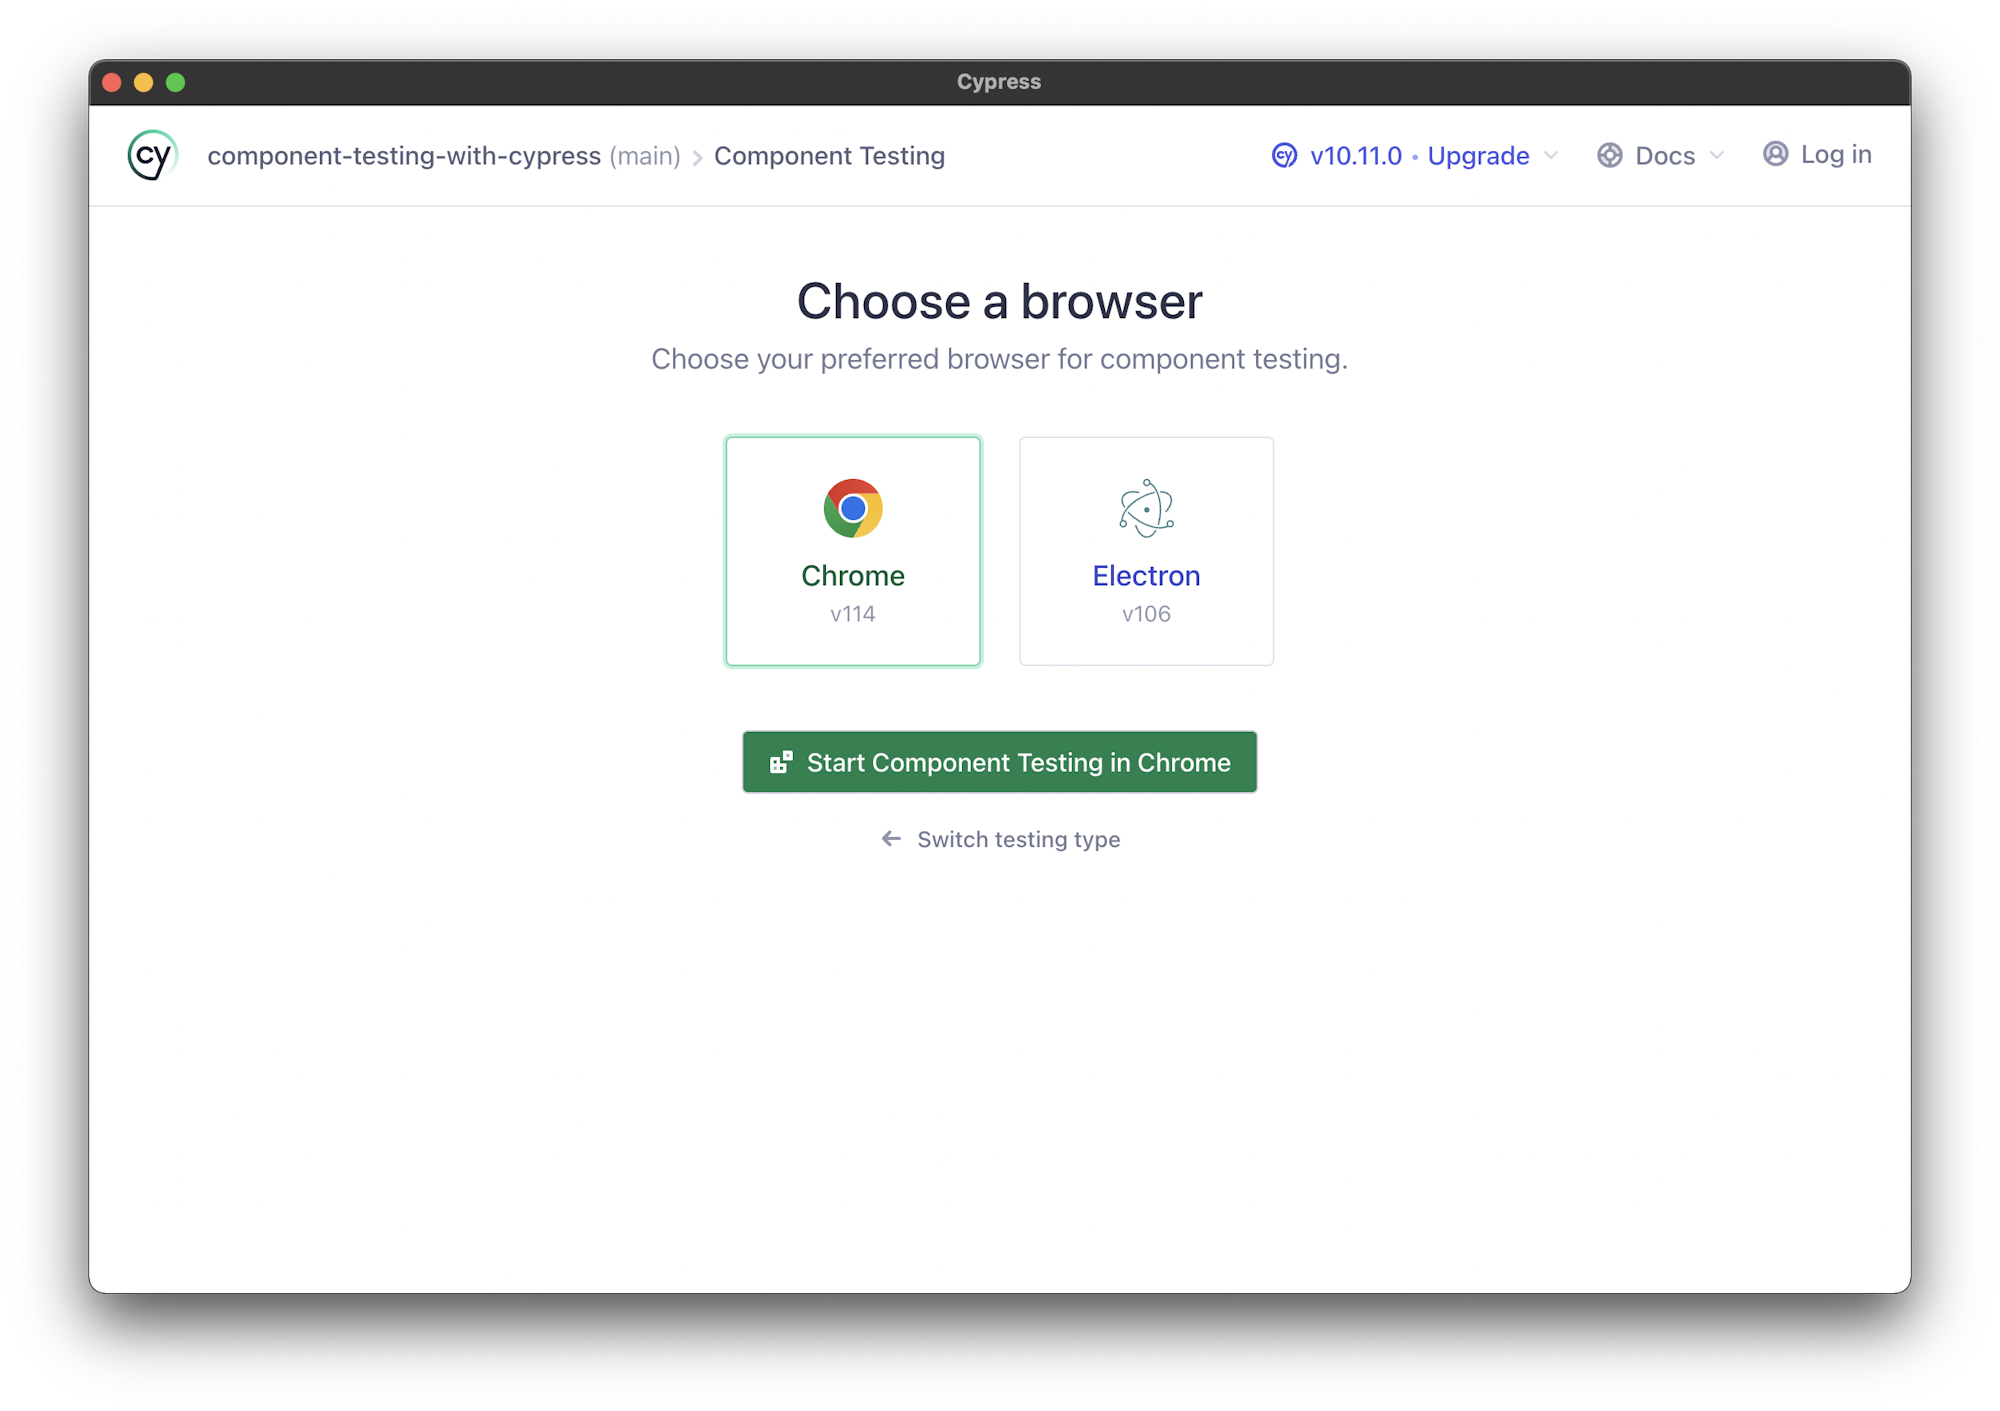 Choose a browser